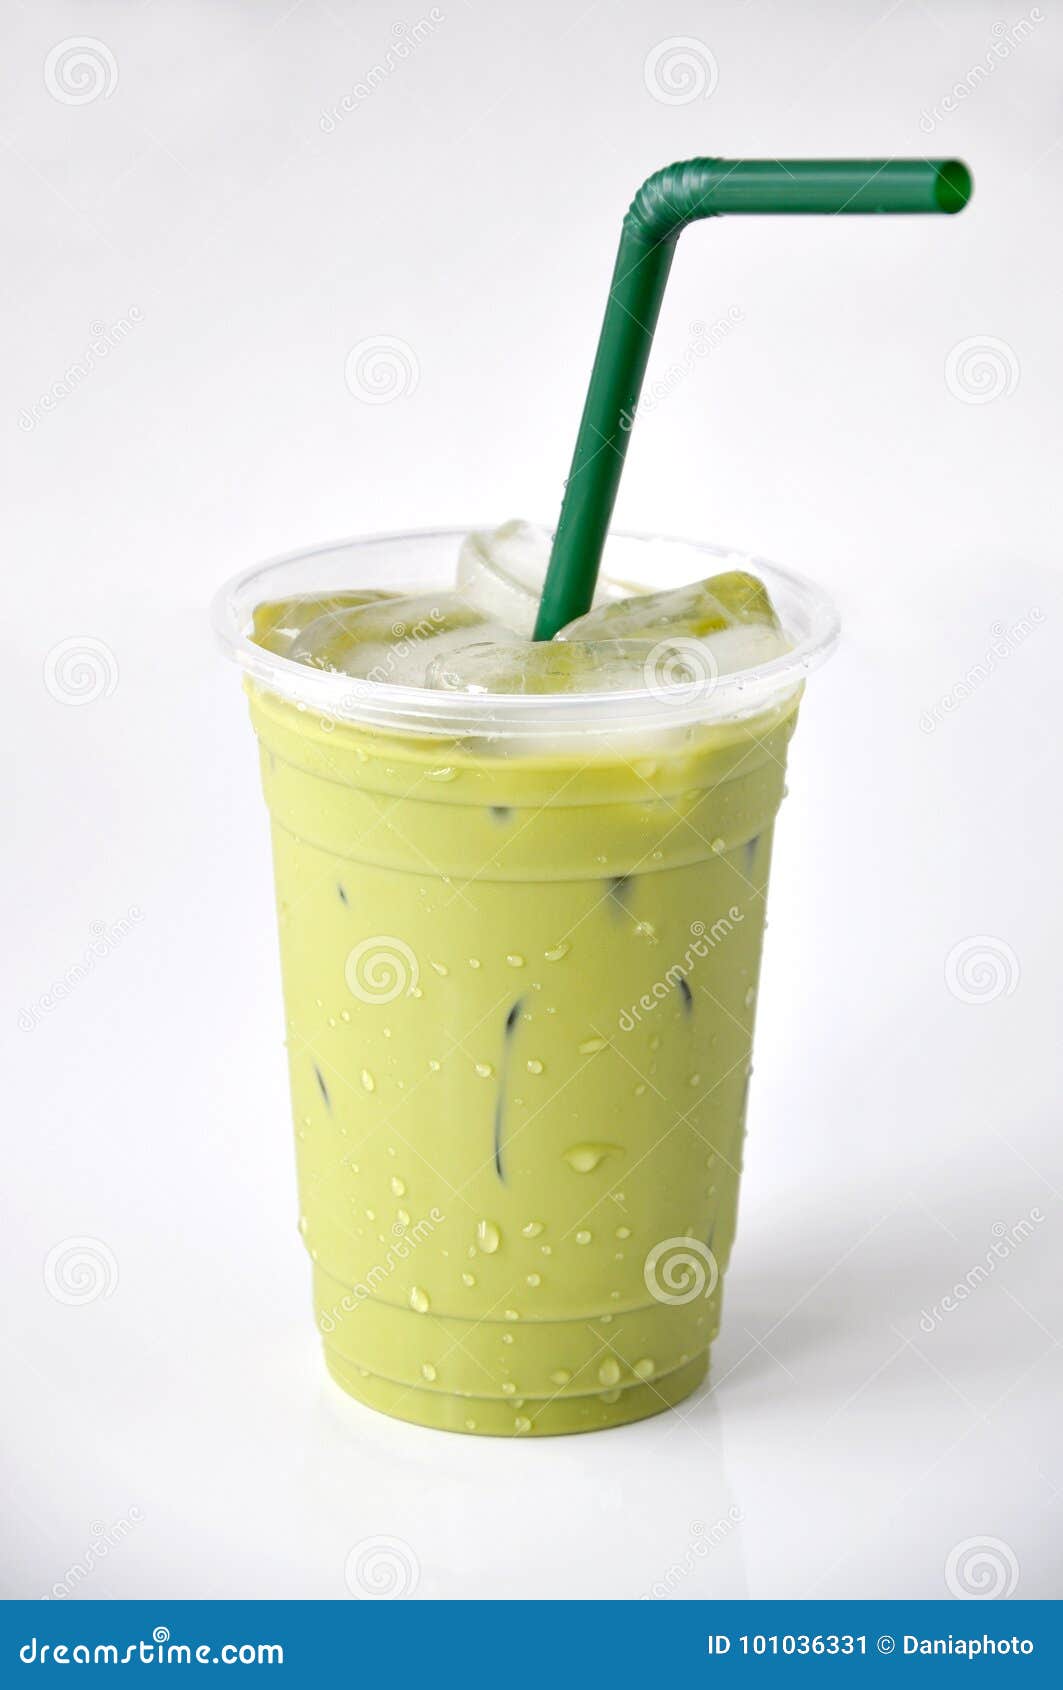 https://thumbs.dreamstime.com/z/iced-green-tea-cup-green-straw-white-background-iced-green-tea-cup-green-straw-101036331.jpg